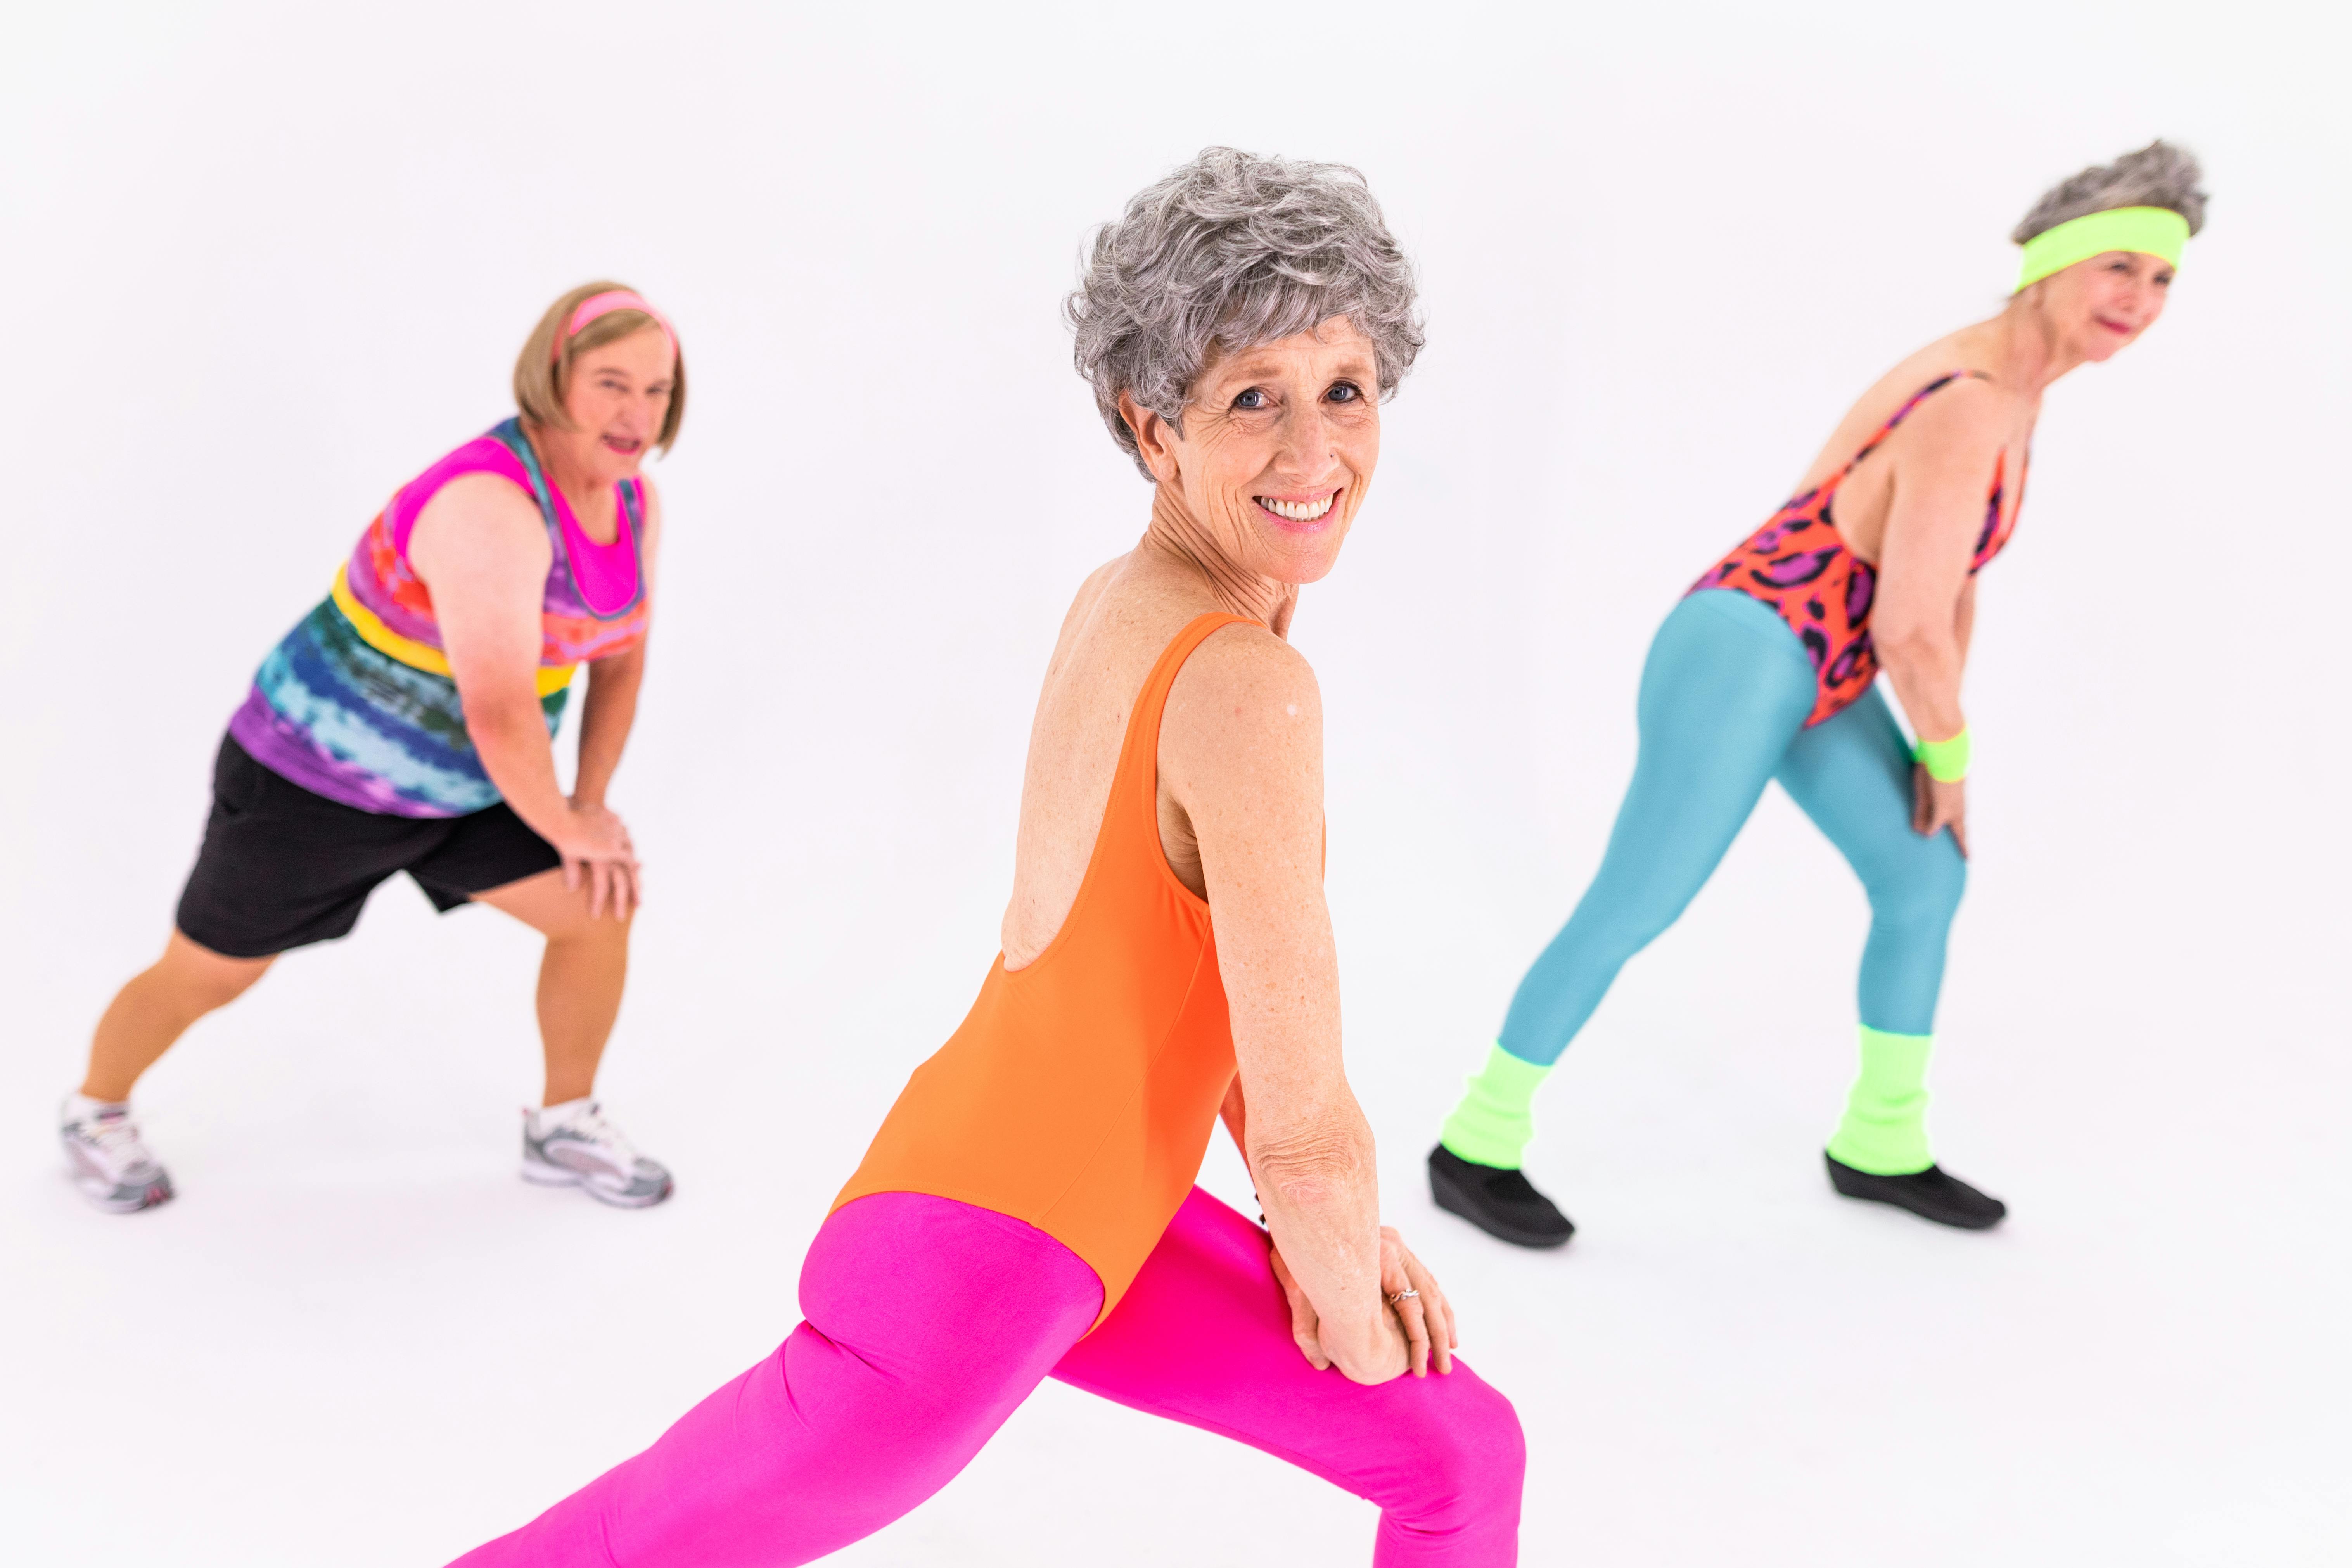 3 Women in Colorful Aerobics Outfit · Free Stock Photo